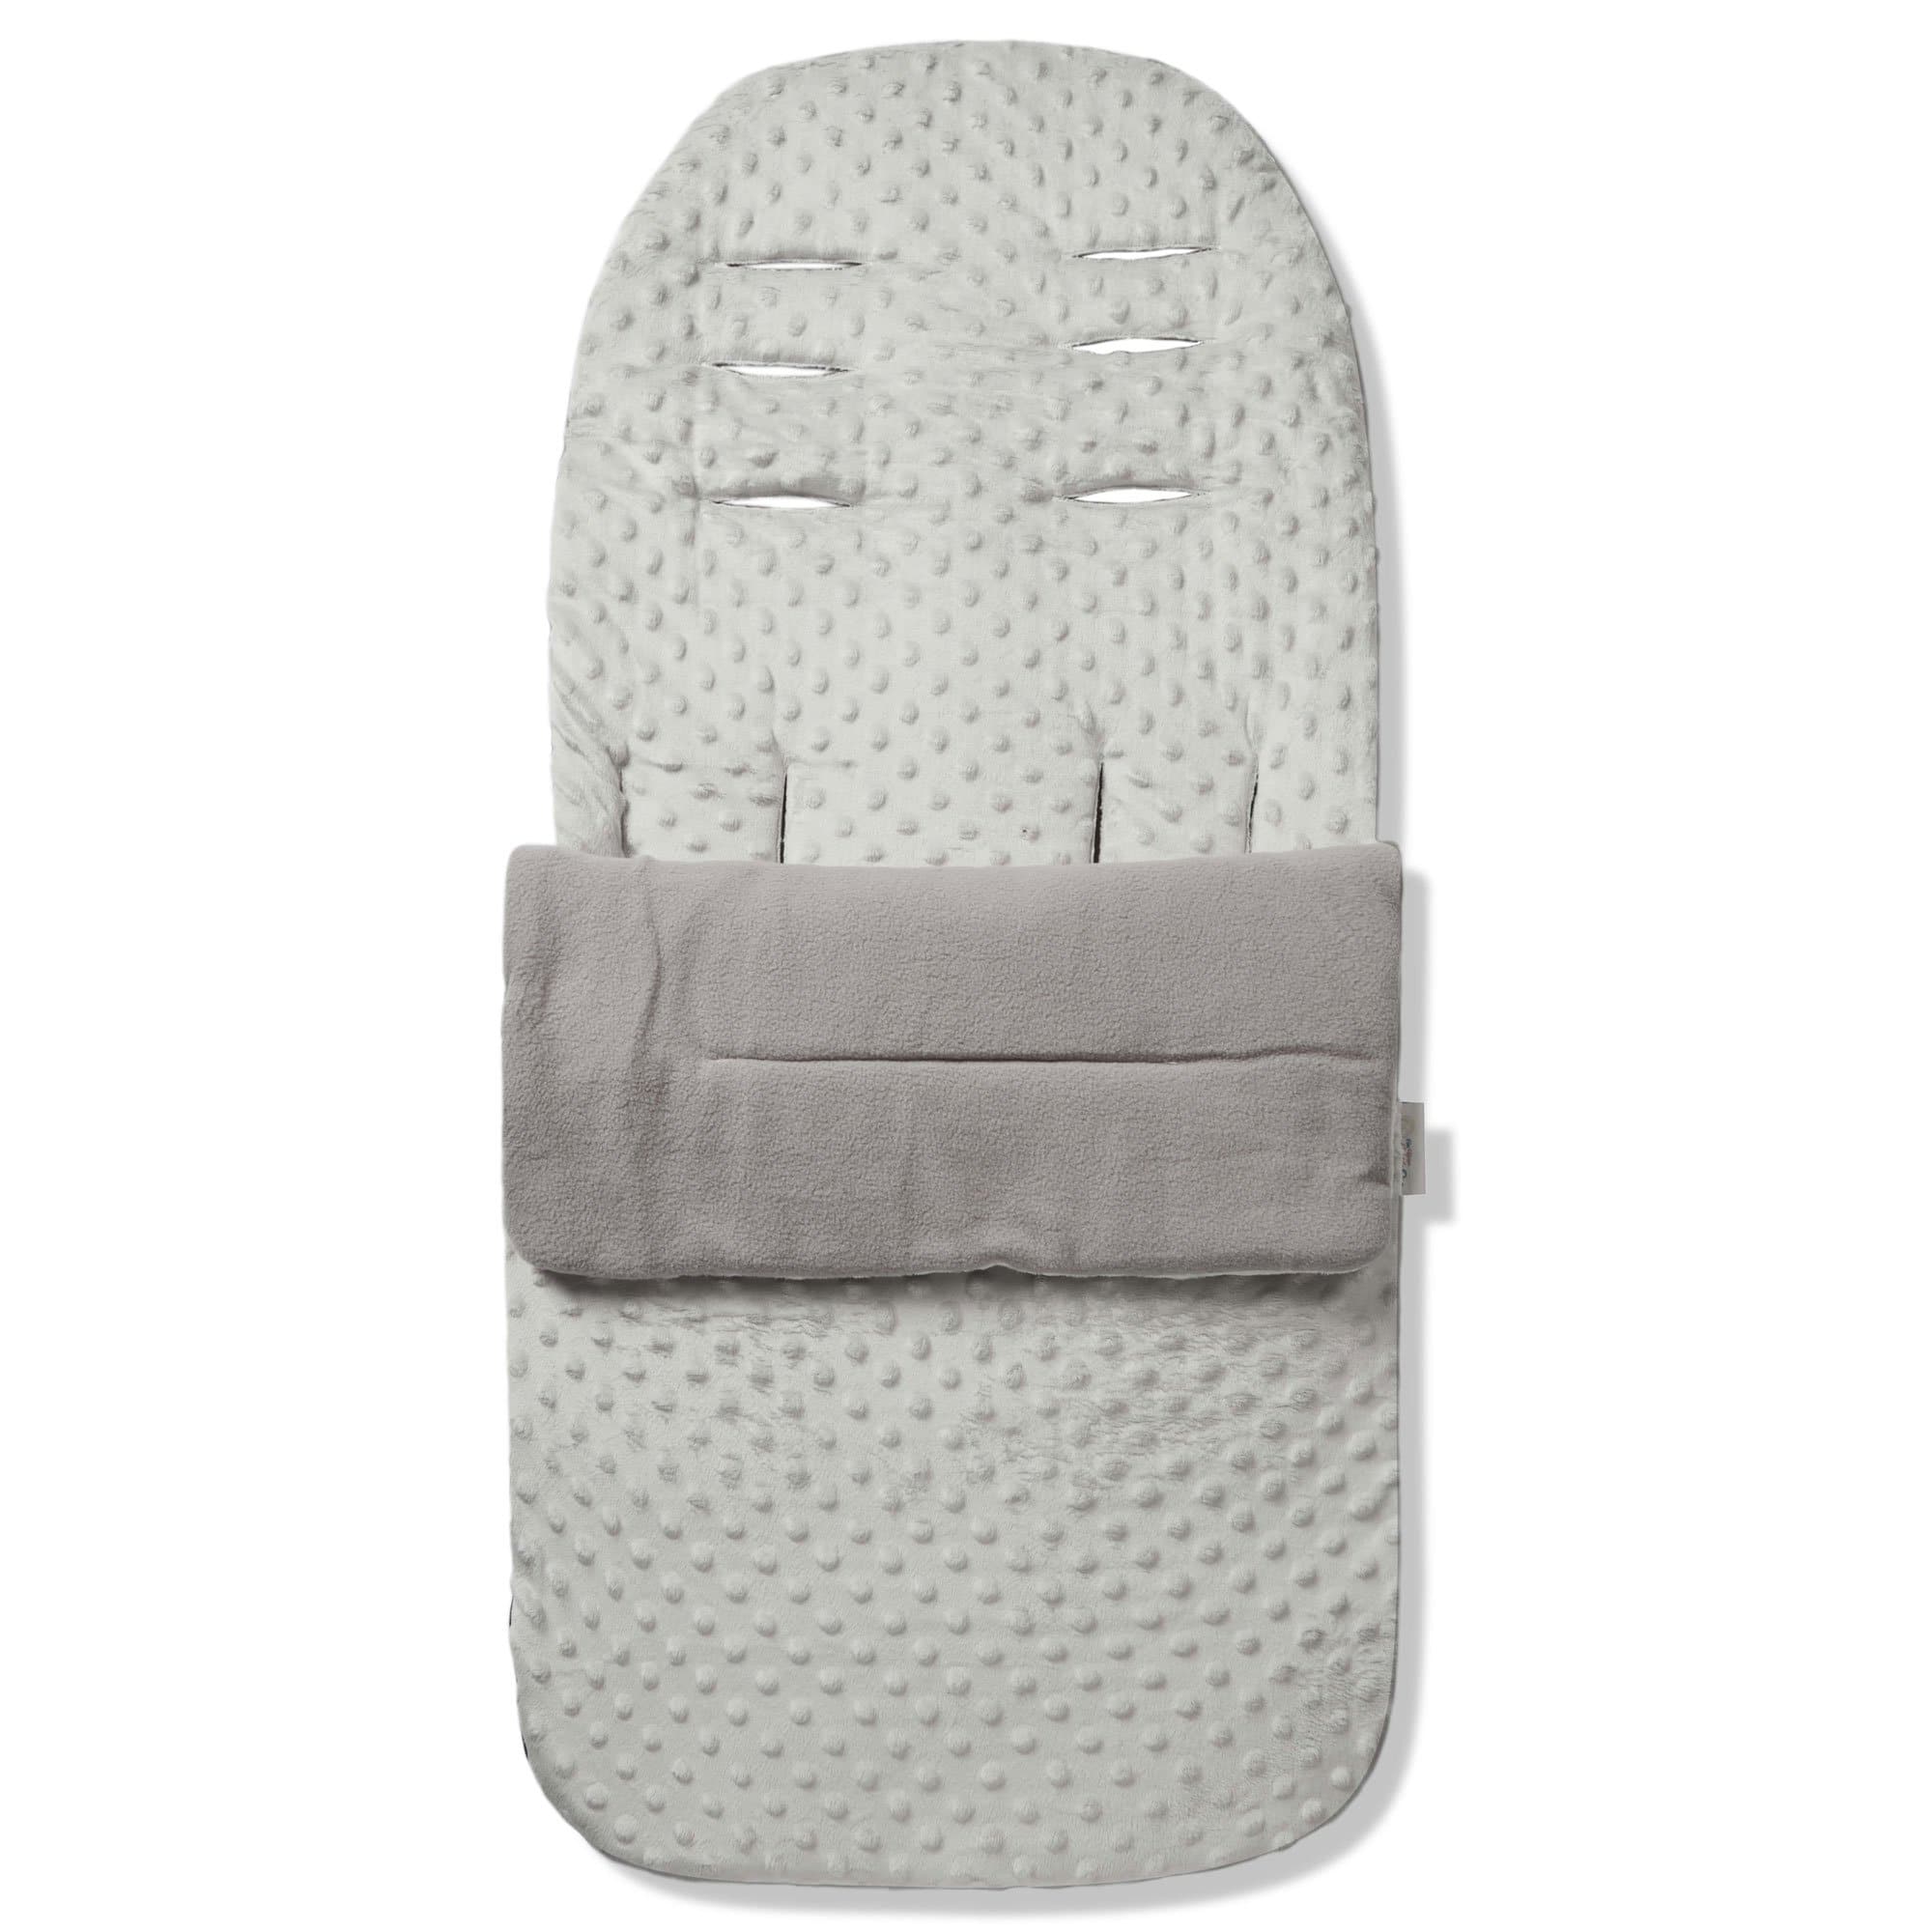 Dimple Footmuff / Cosy Toes Compatible with Teutonia - Grey / Fits All Models | For Your Little One